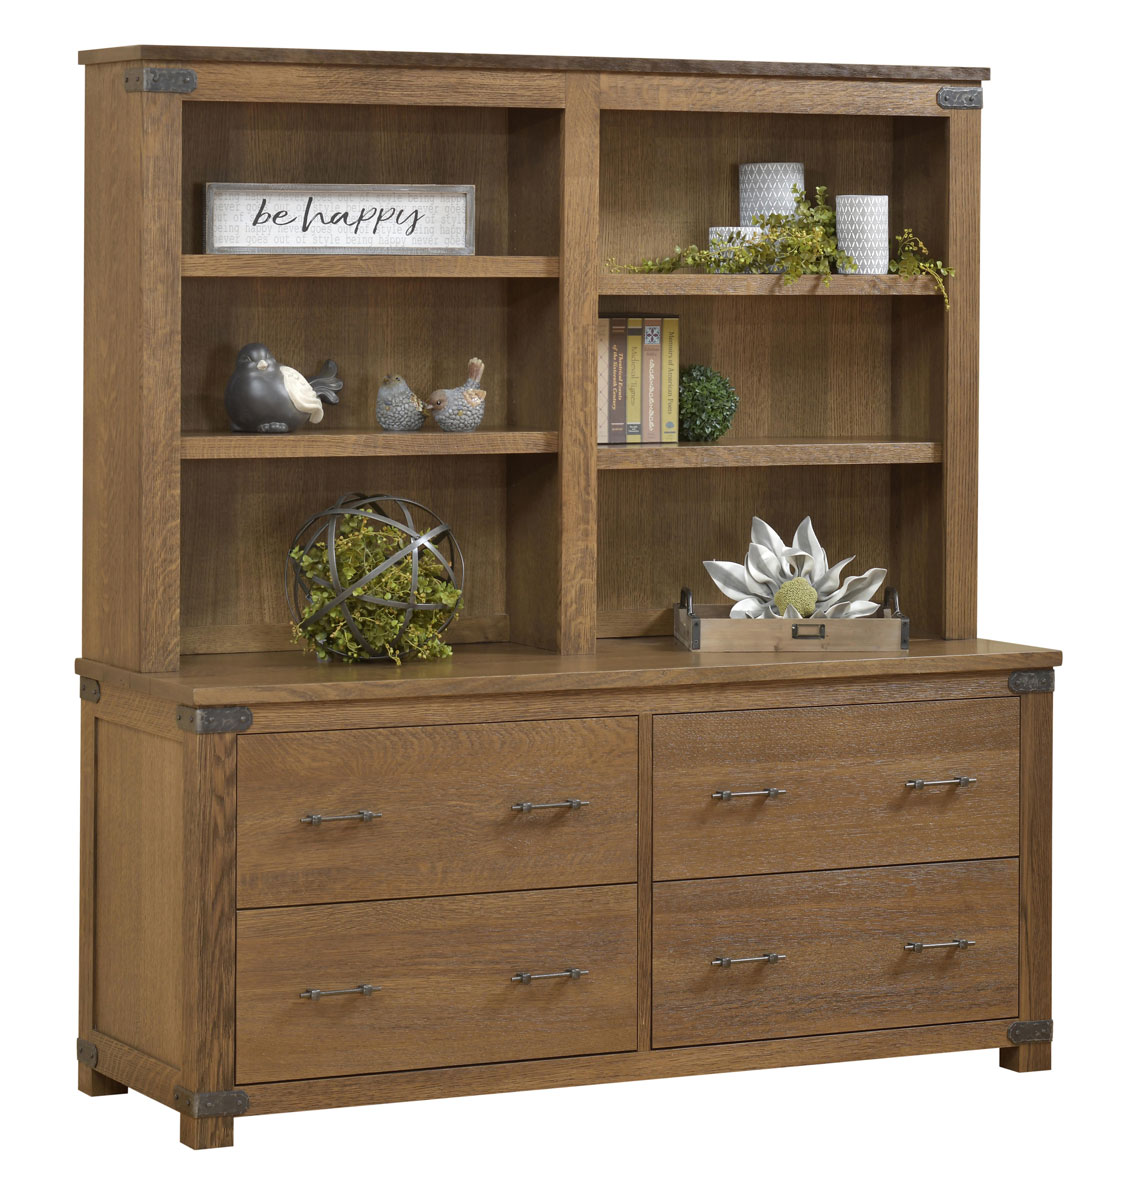 Georgetown Series Double Lateral File and Bookshelf Hutch 